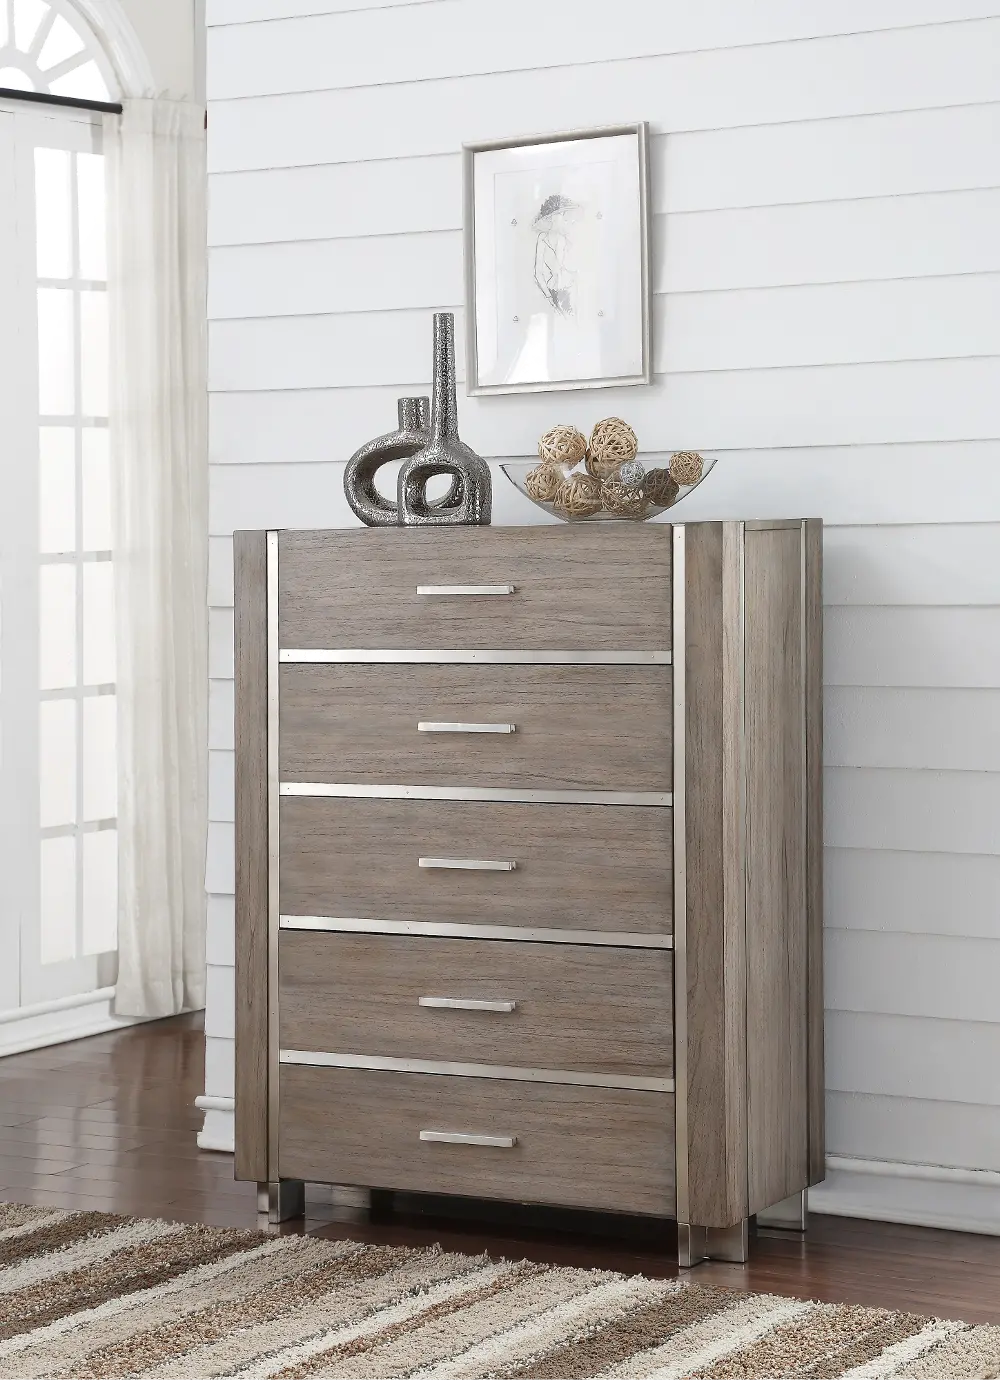 Contemporary Gray and Silver Chest of Drawers - Buena Vista-1